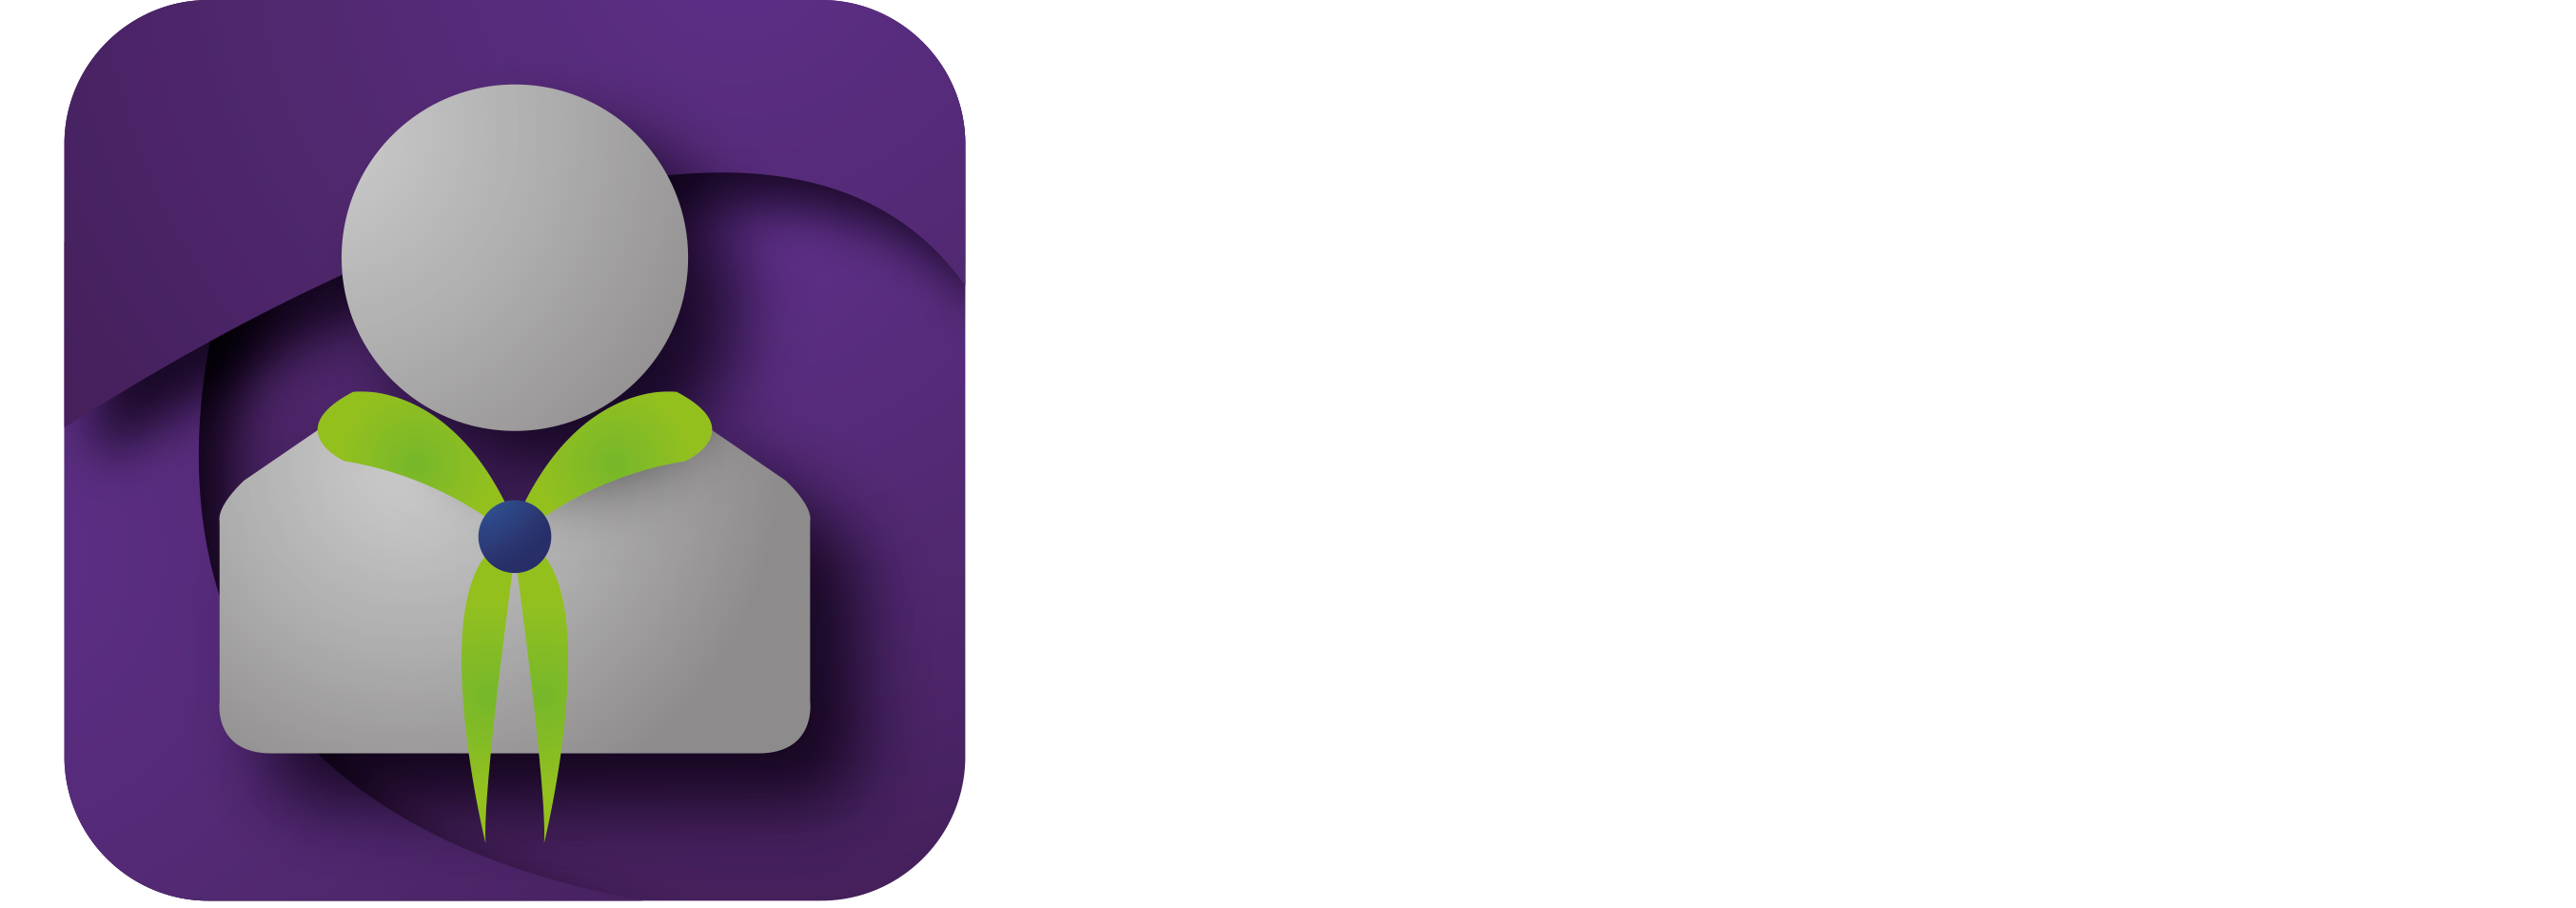 Siscout